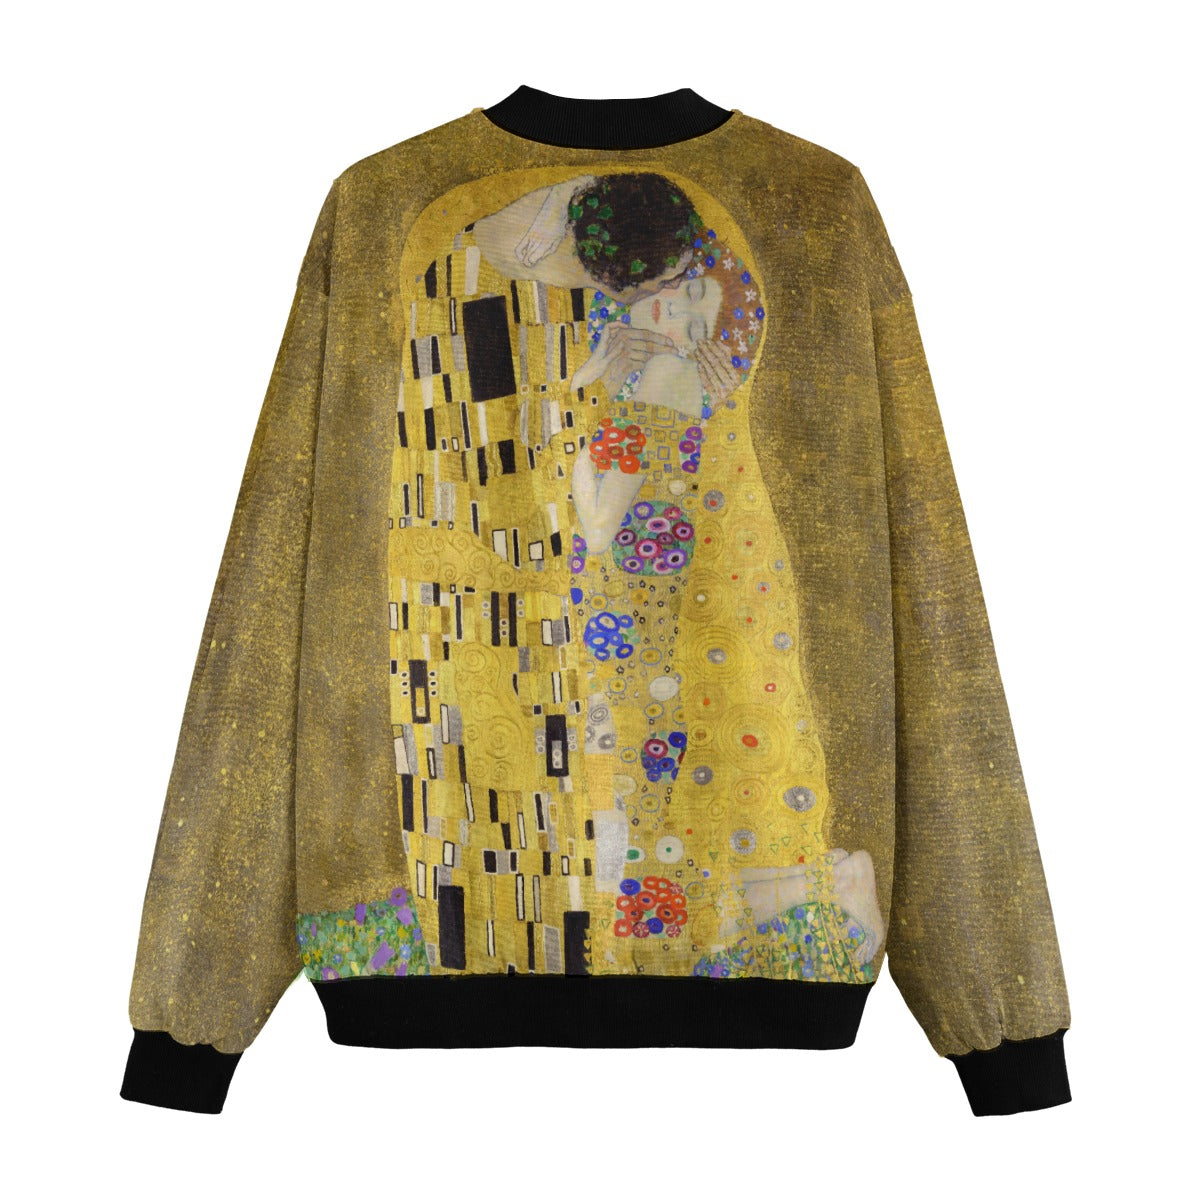 Artistic Wear Inspired by Famous Painting